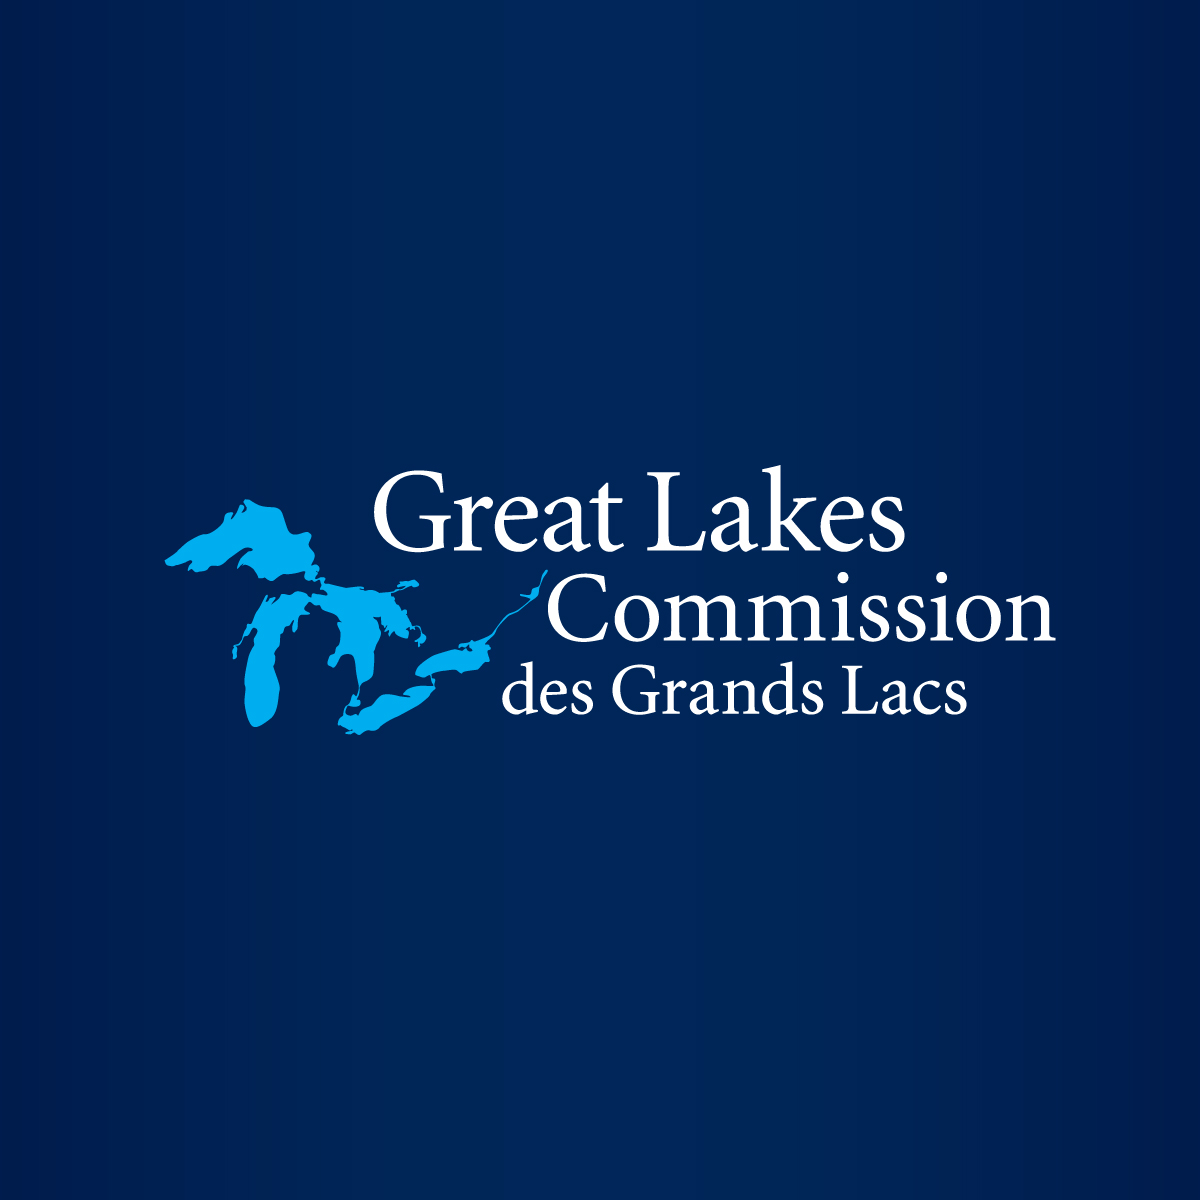 commentary lets end the great lakes restoration initiative when its finished